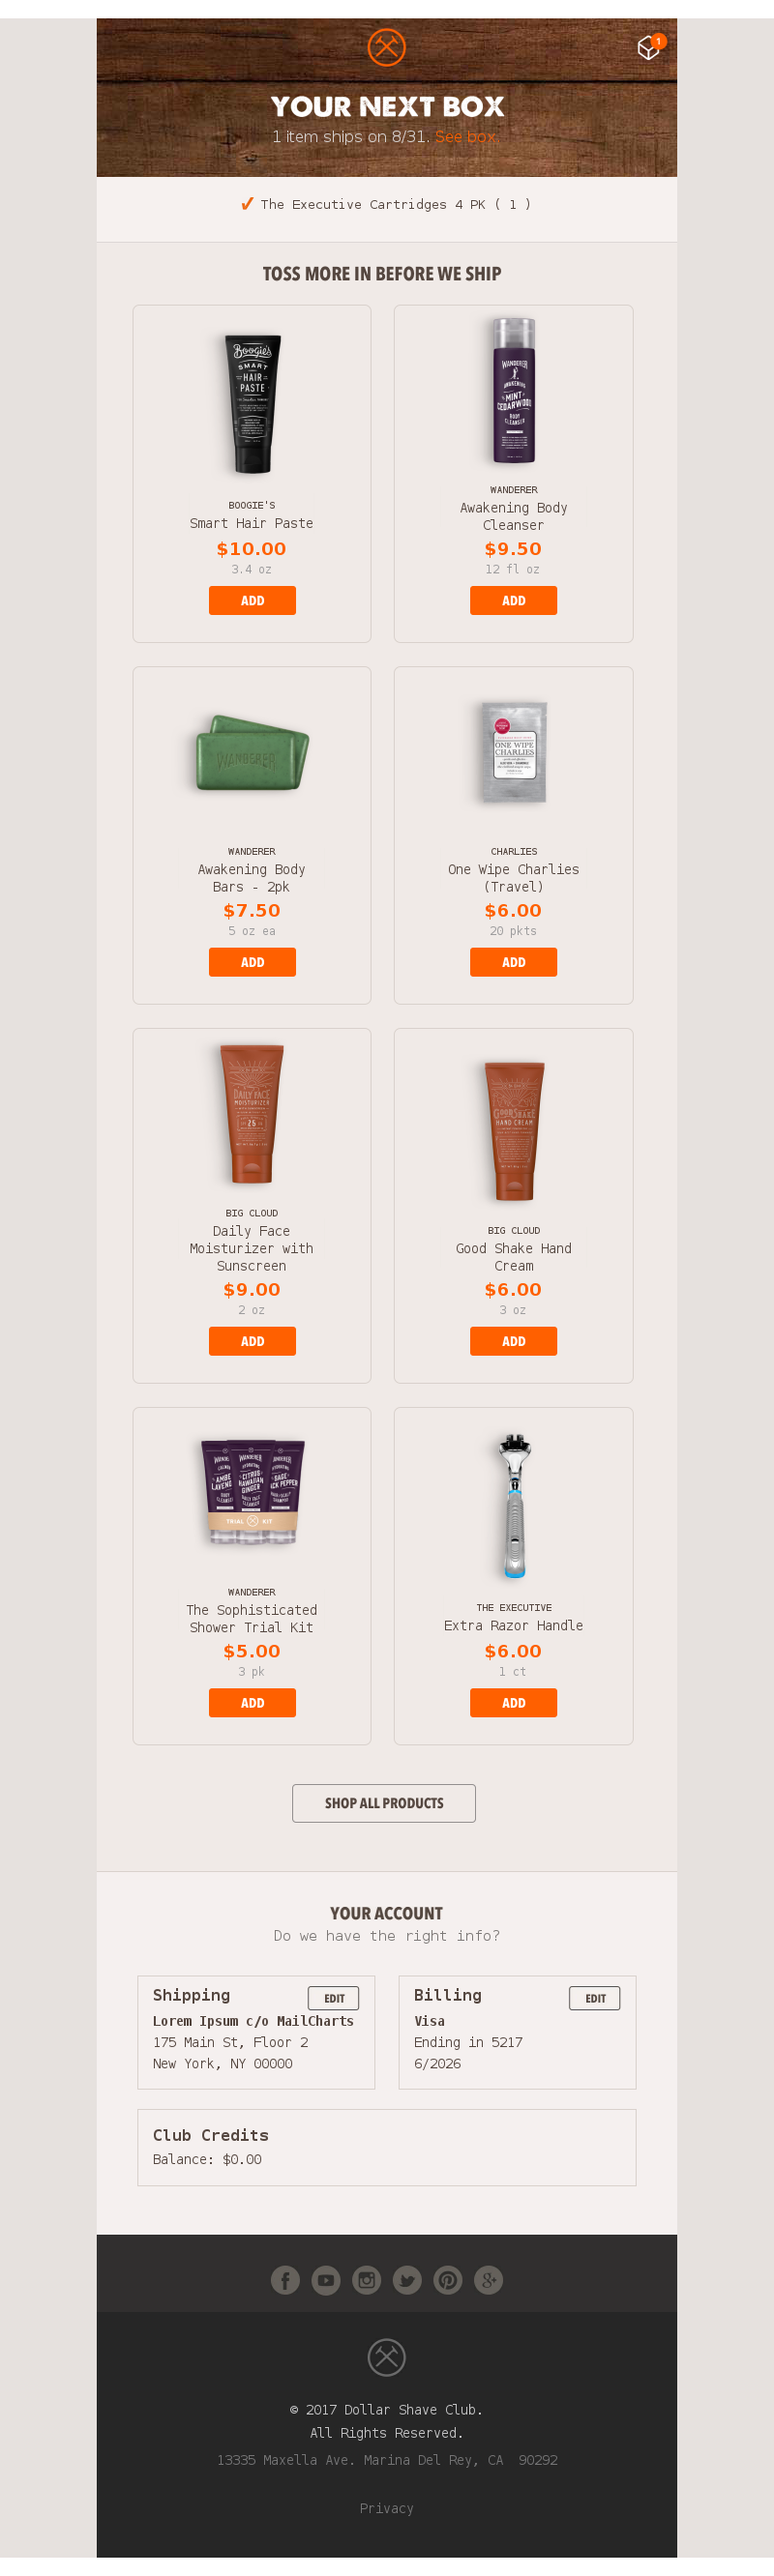 Dollar Shave Club s Purchase Email Unboxing Experience MailCharts